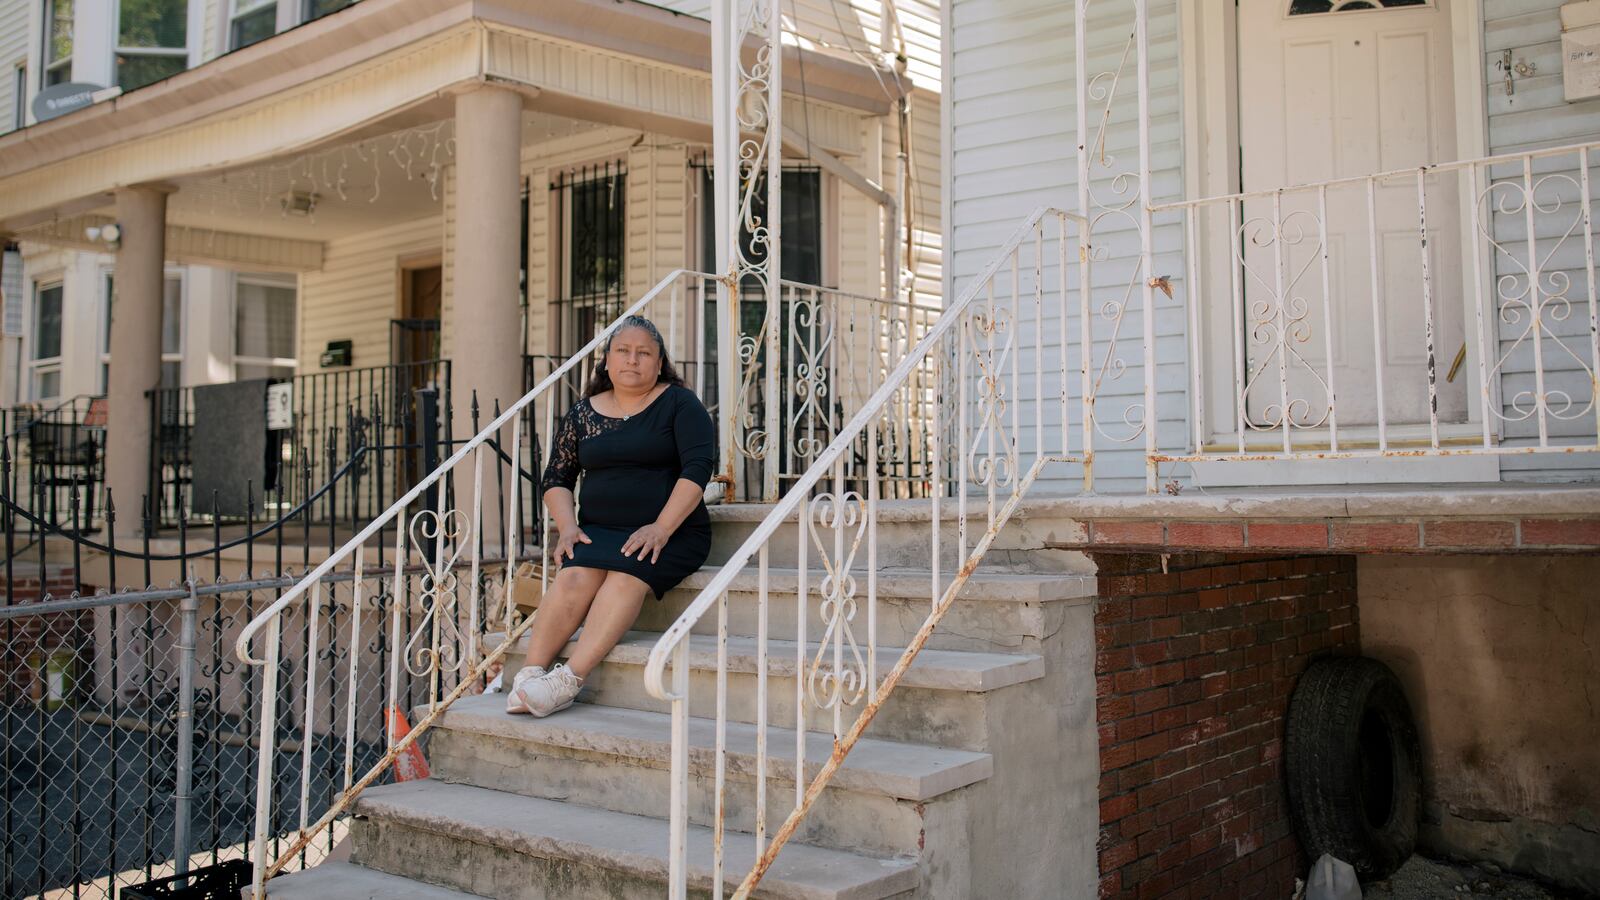 Patricia Coyotecatl, wearing a black dress and white sneakers, sits on the concrete front steps of her home in Newark, which is framed by a white metal fence on either side.